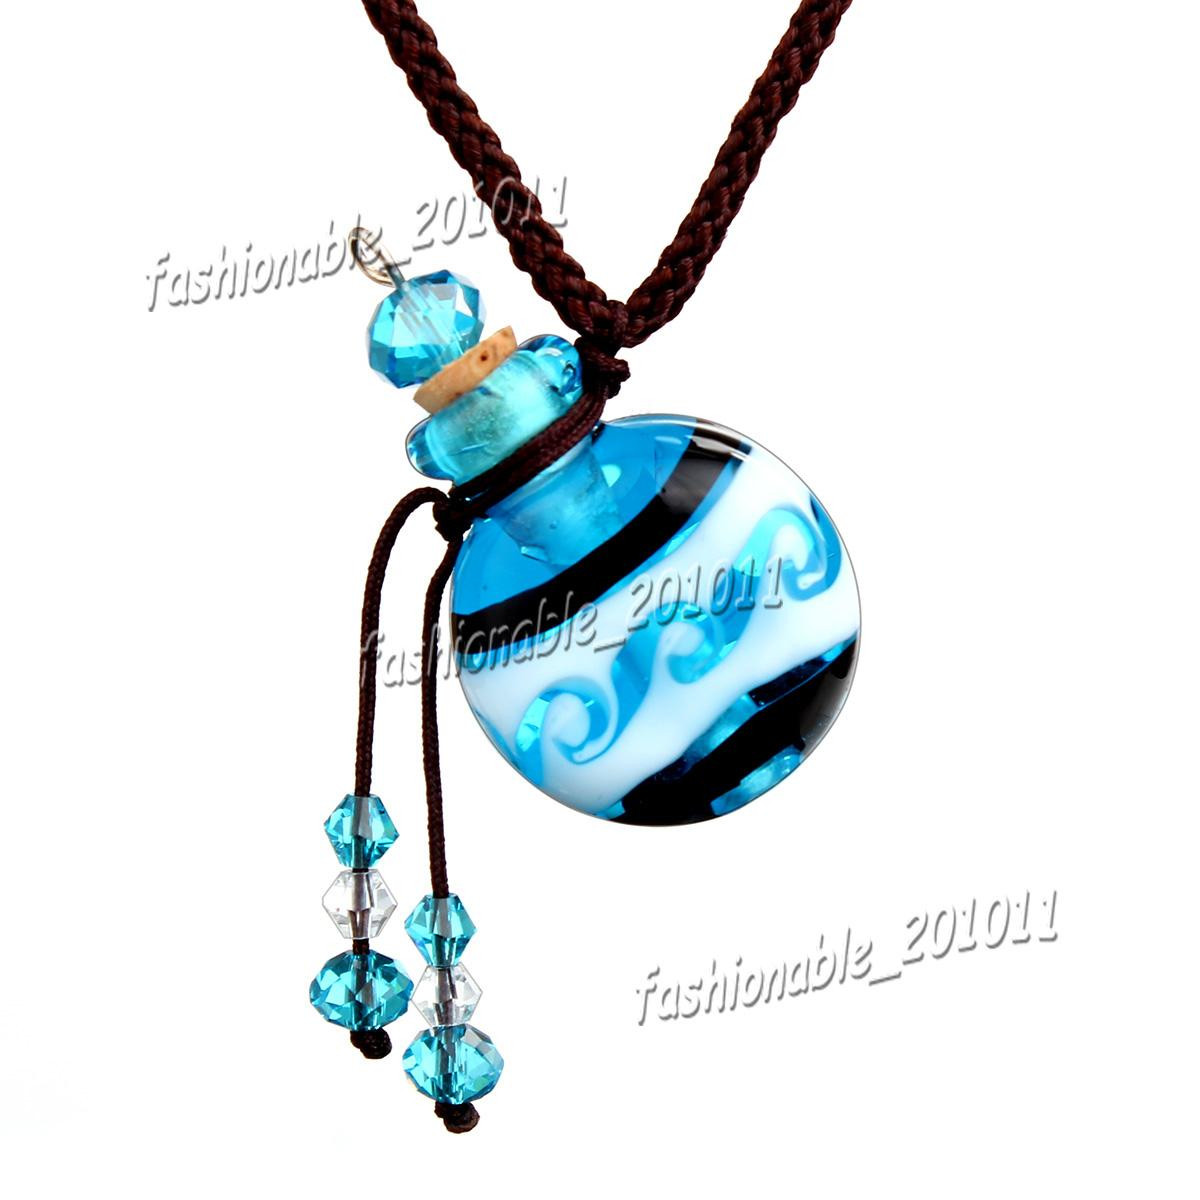 murano vases for sale of round glass essential oil diffuser necklaces flowers vial pendant with regard to round glass essential oil diffuser necklaces flowers vial pendant necklace aromatherapy pendant vintage perfume bottle pendant necklaces ob5 murano glass